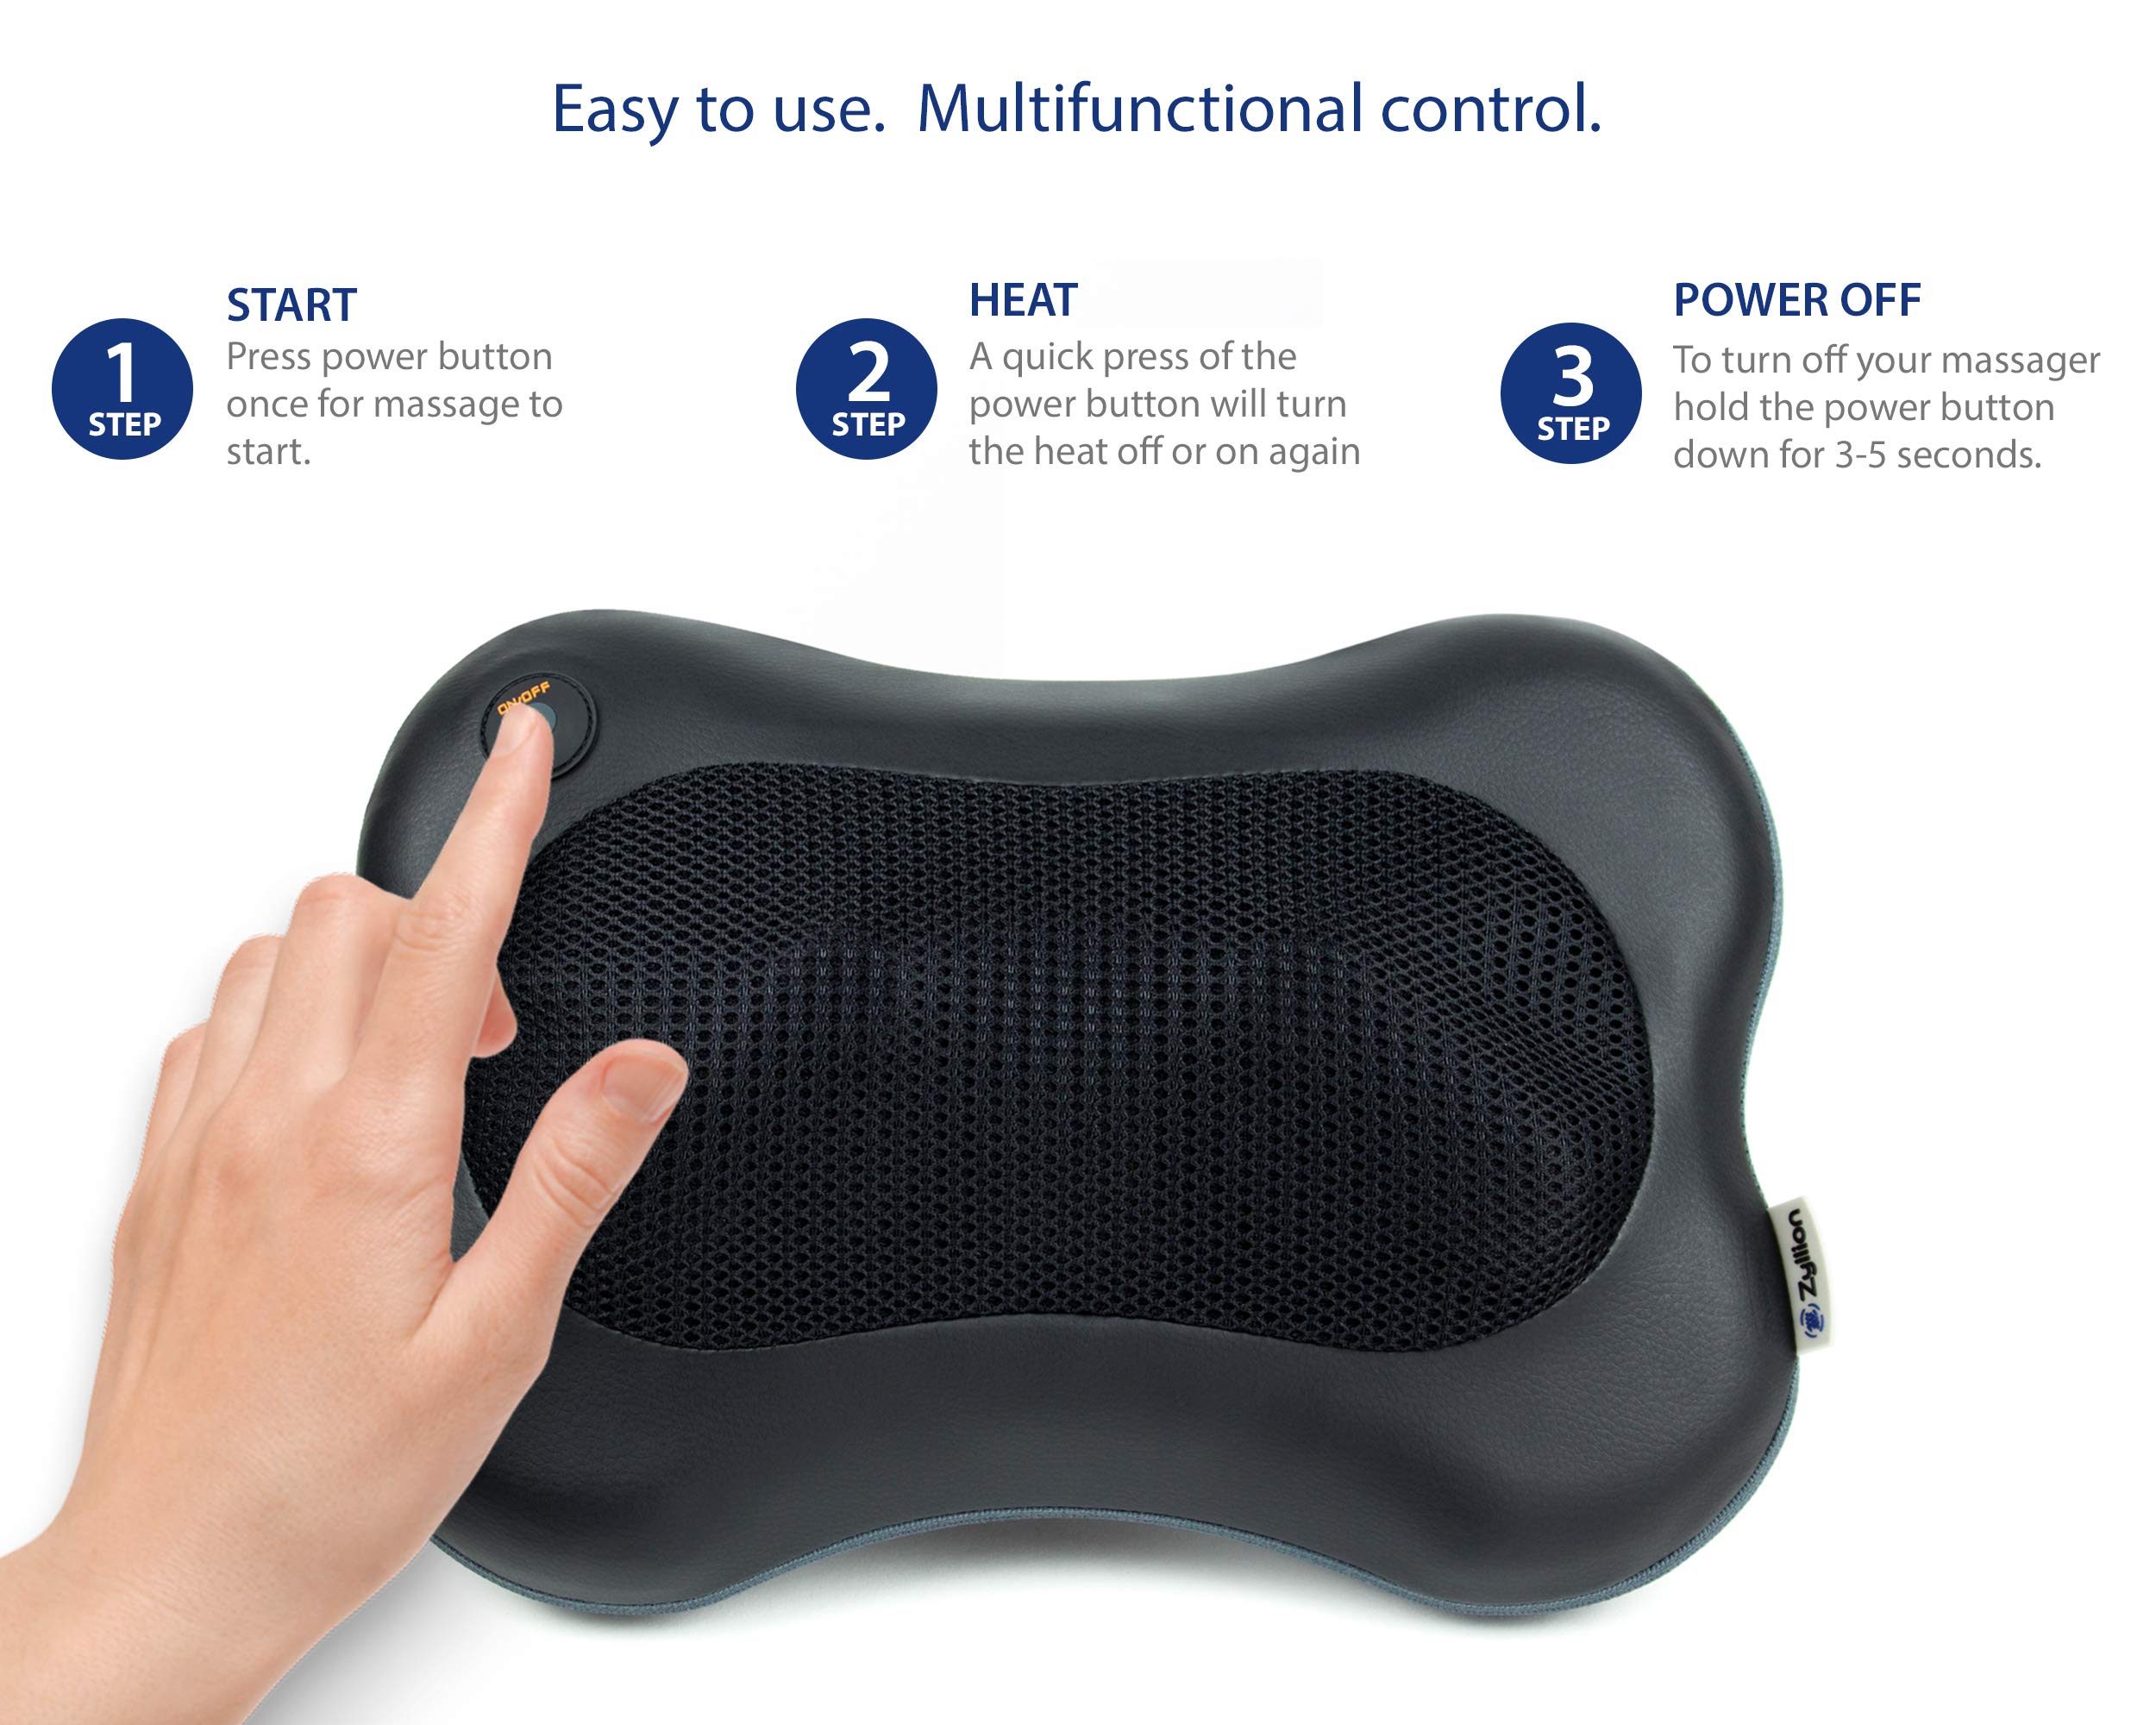 Zyllion Shiatsu Back Neck Massager - Kneading Massage Pillow with Heat for Shoulders, Lower Back, Calf, Legs, Foot - Use at Home, Office, and Car, ZMA-13-BK (Black) Black - $62.95